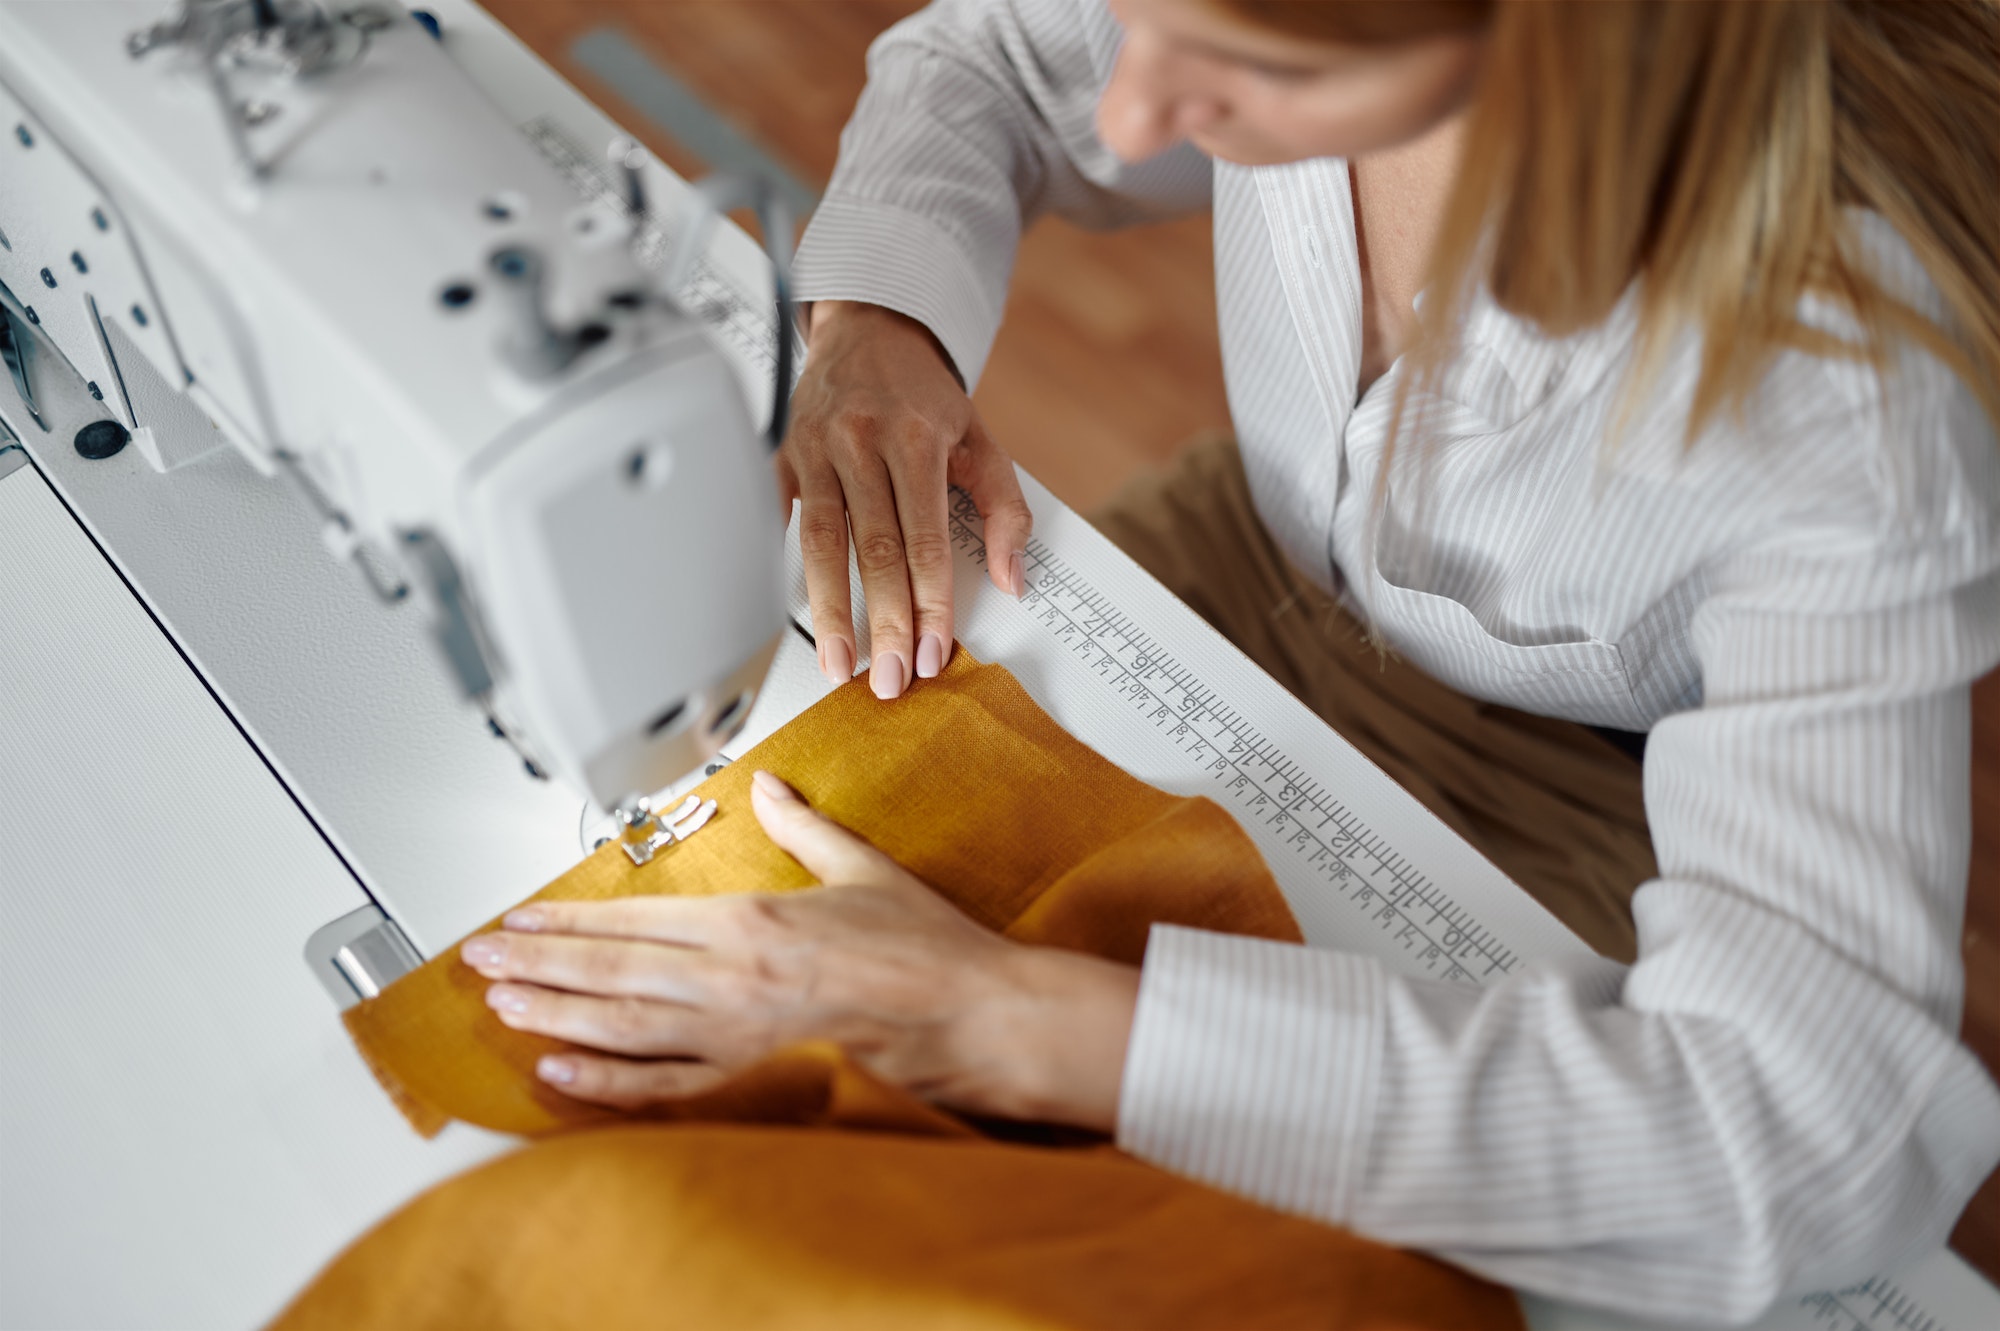 Seamstress works on sewing machine at workplace